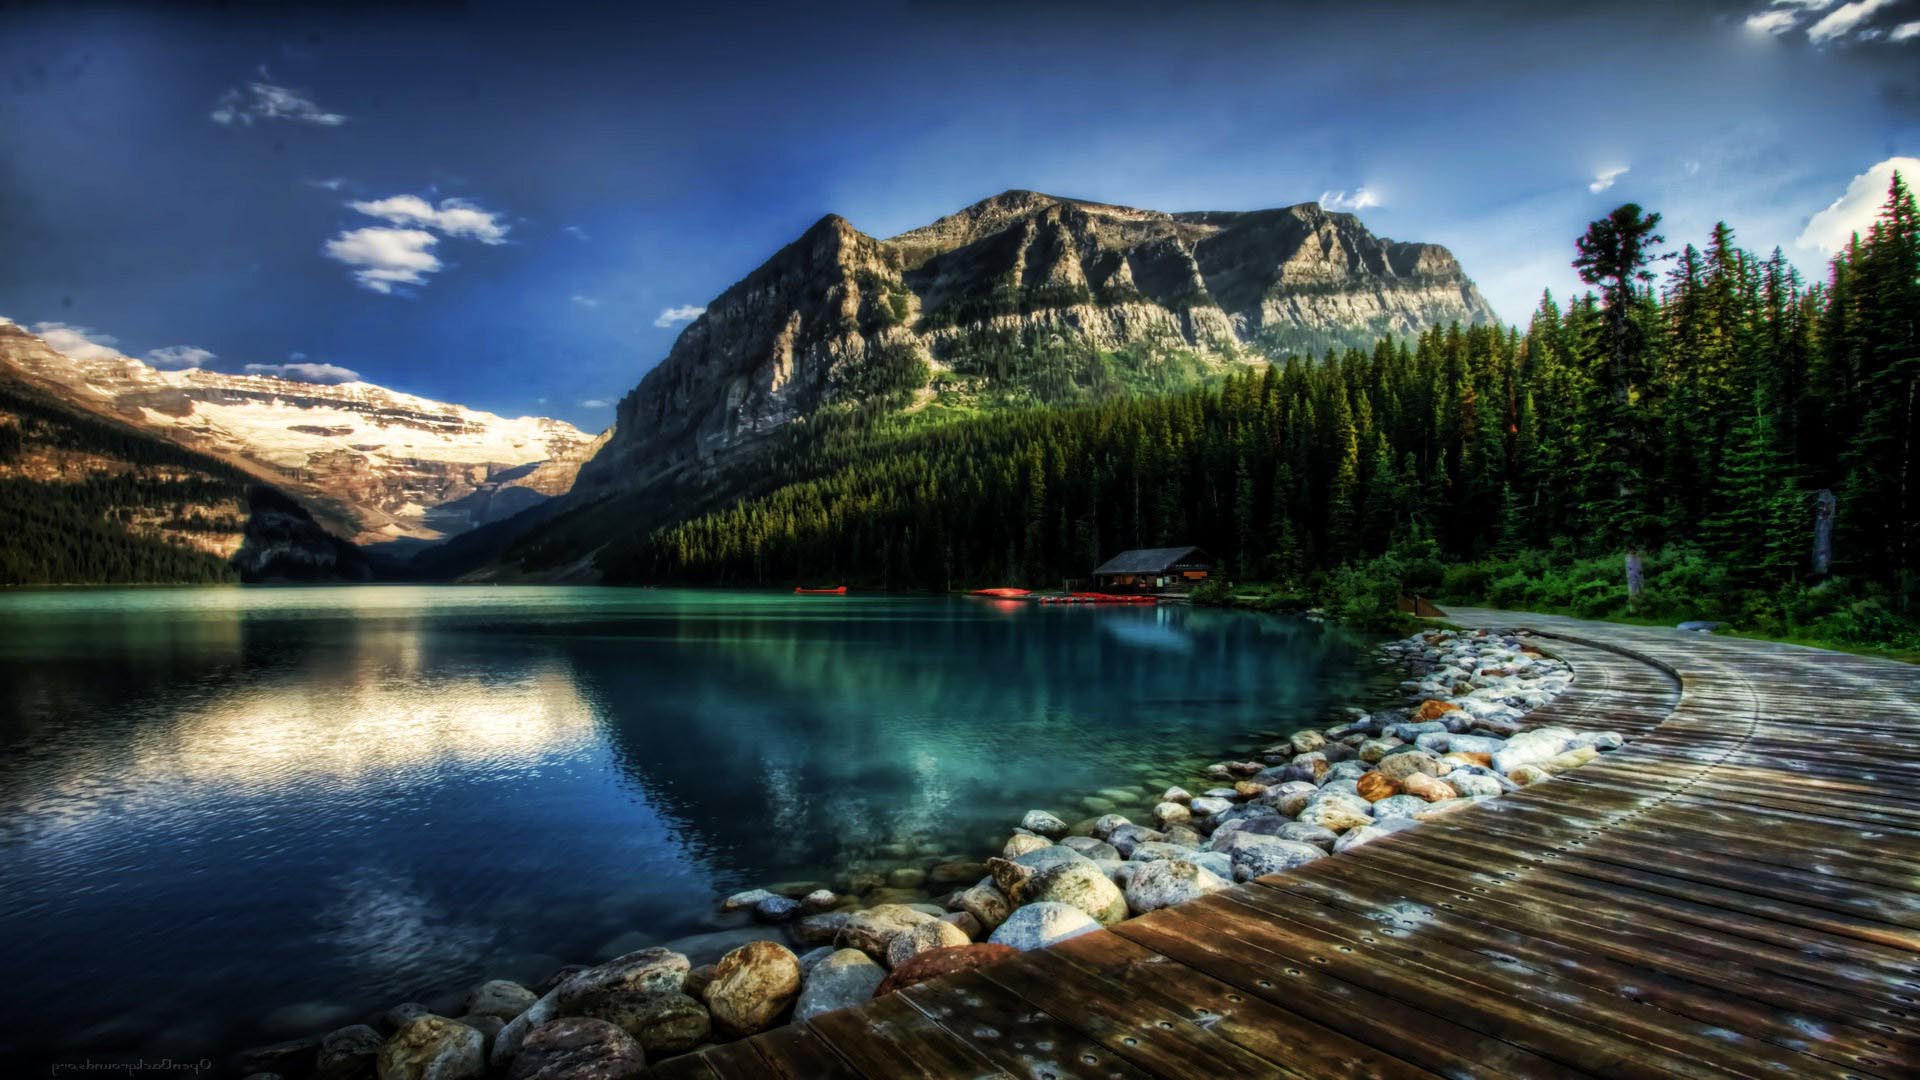 Lake Louise in Alberta, Canada Full HD Wallpaper and Background